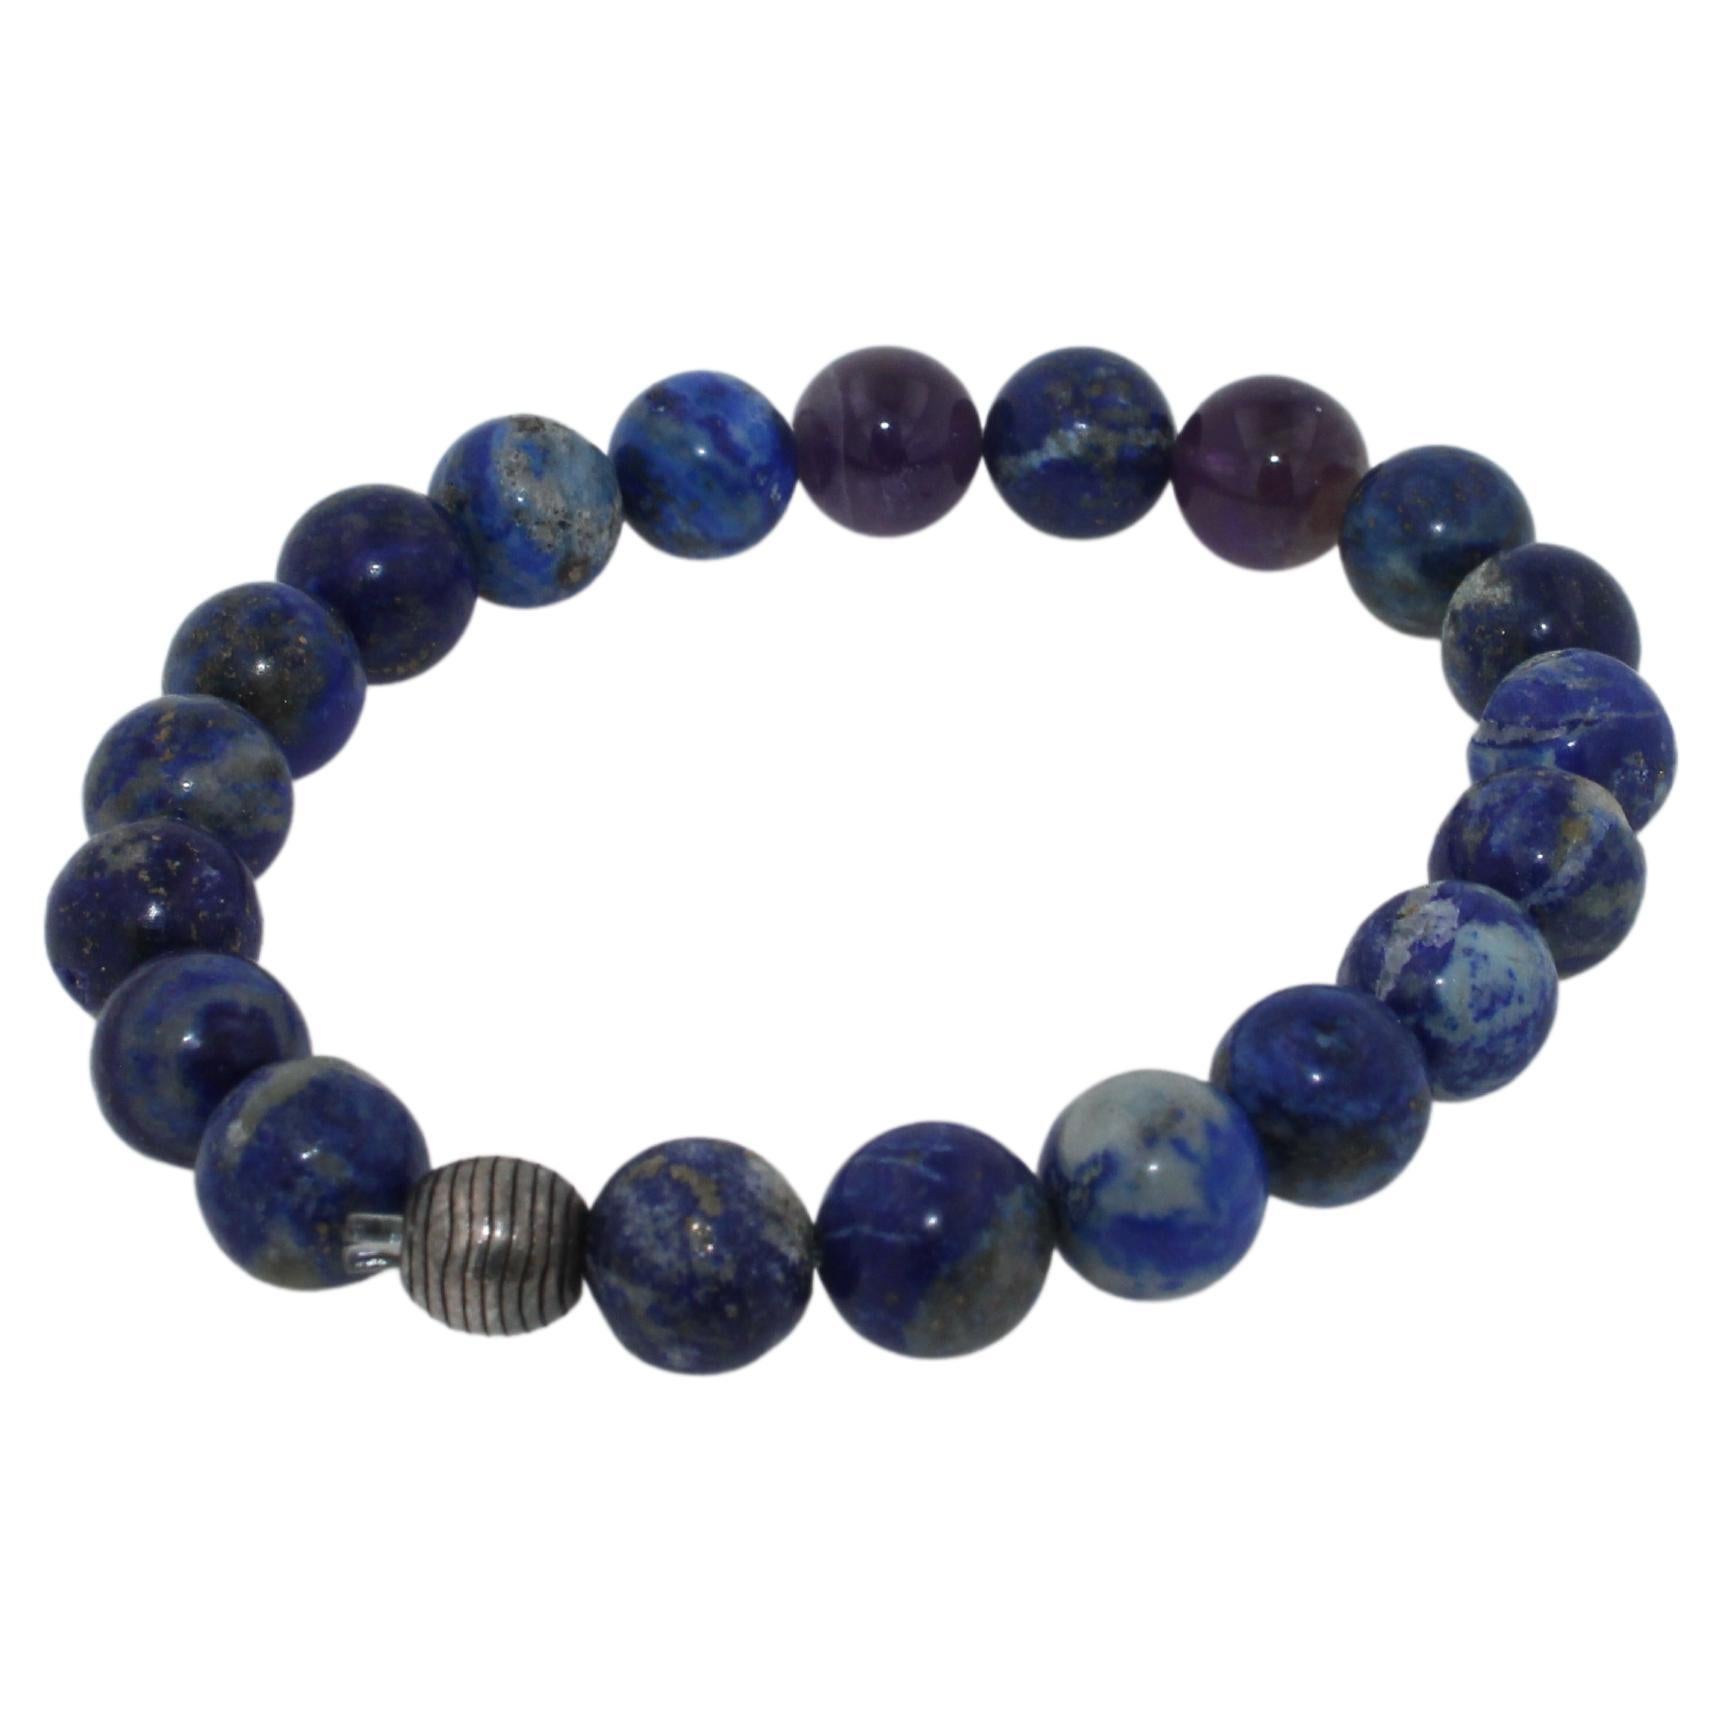 Blue Lapis Lazuli Purple Violet Lilac Amethysts Round Bead Stretchy Unique Statement Circle Beads Chakra Bracelet
Size of Bracelet - Fits Wrist Sizes of 6-9 Inches (Flexible Stretching Wire)
Natural, Genuine Gemstones